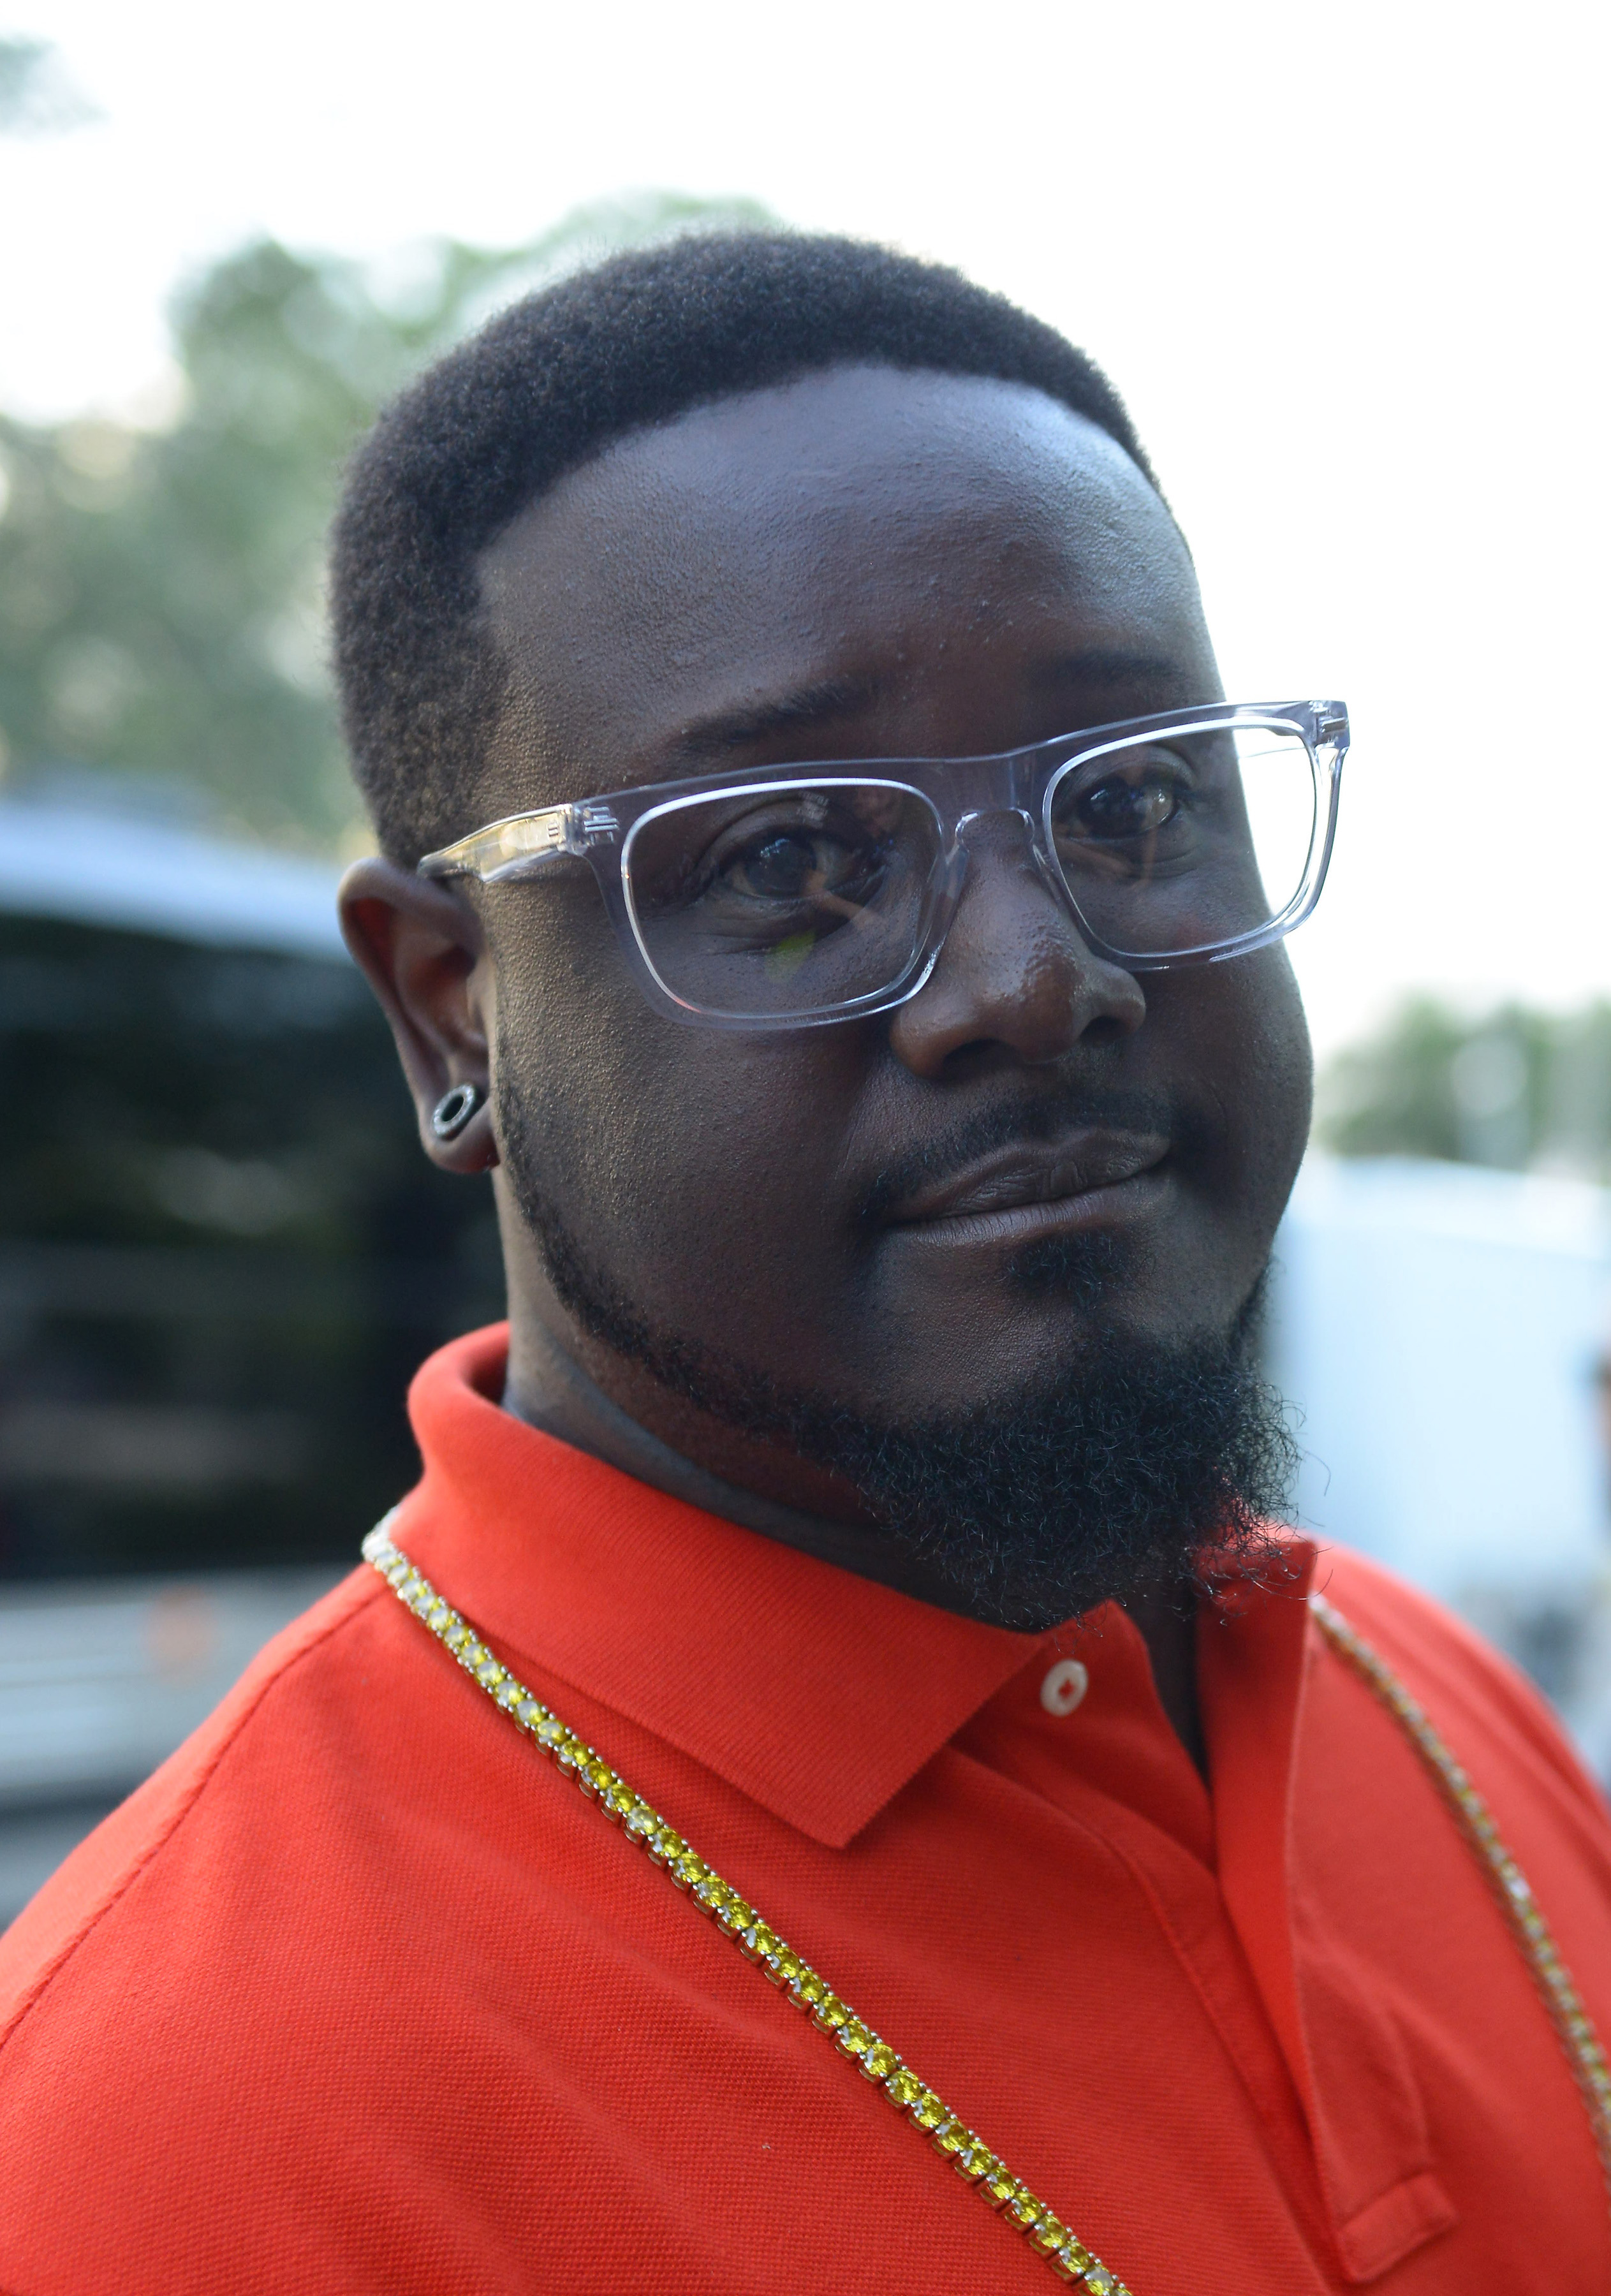 T-Pain backstage before performing during the 'Drankin Patna Tour' with support from Bando Jonez and Snootie Wild at Revolution on Aug. 12, 2014 in Fort Lauderdale, Florida. (Johnny Louis—FilmMagic/Getty Images)